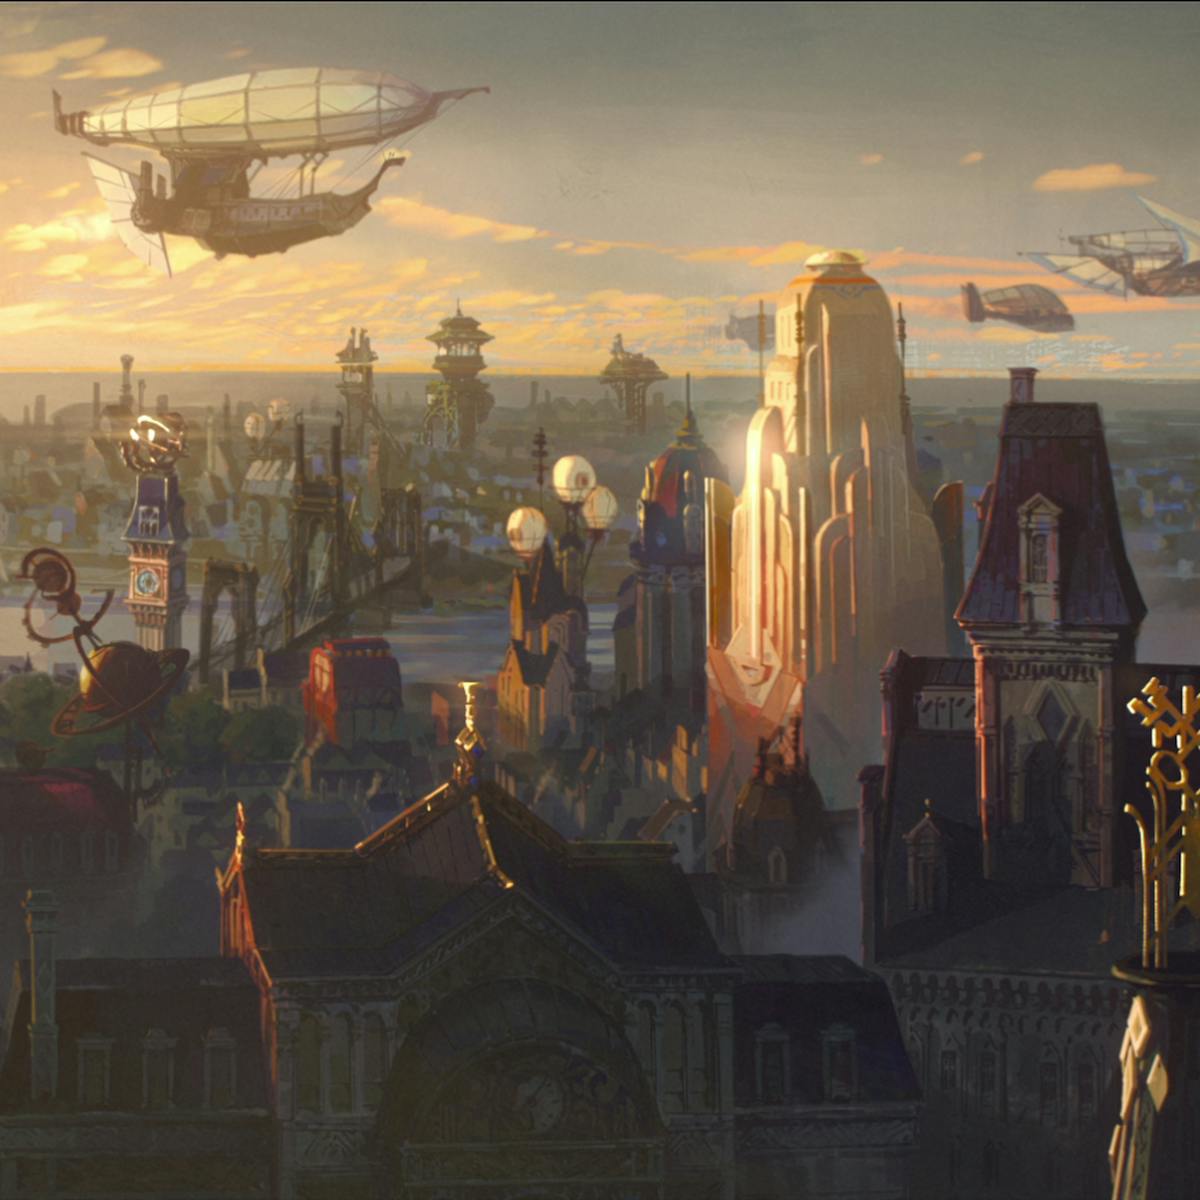 The world of Arcane. The buildings are lit by a rising sun, and the sky is dotted with flying vehicles.